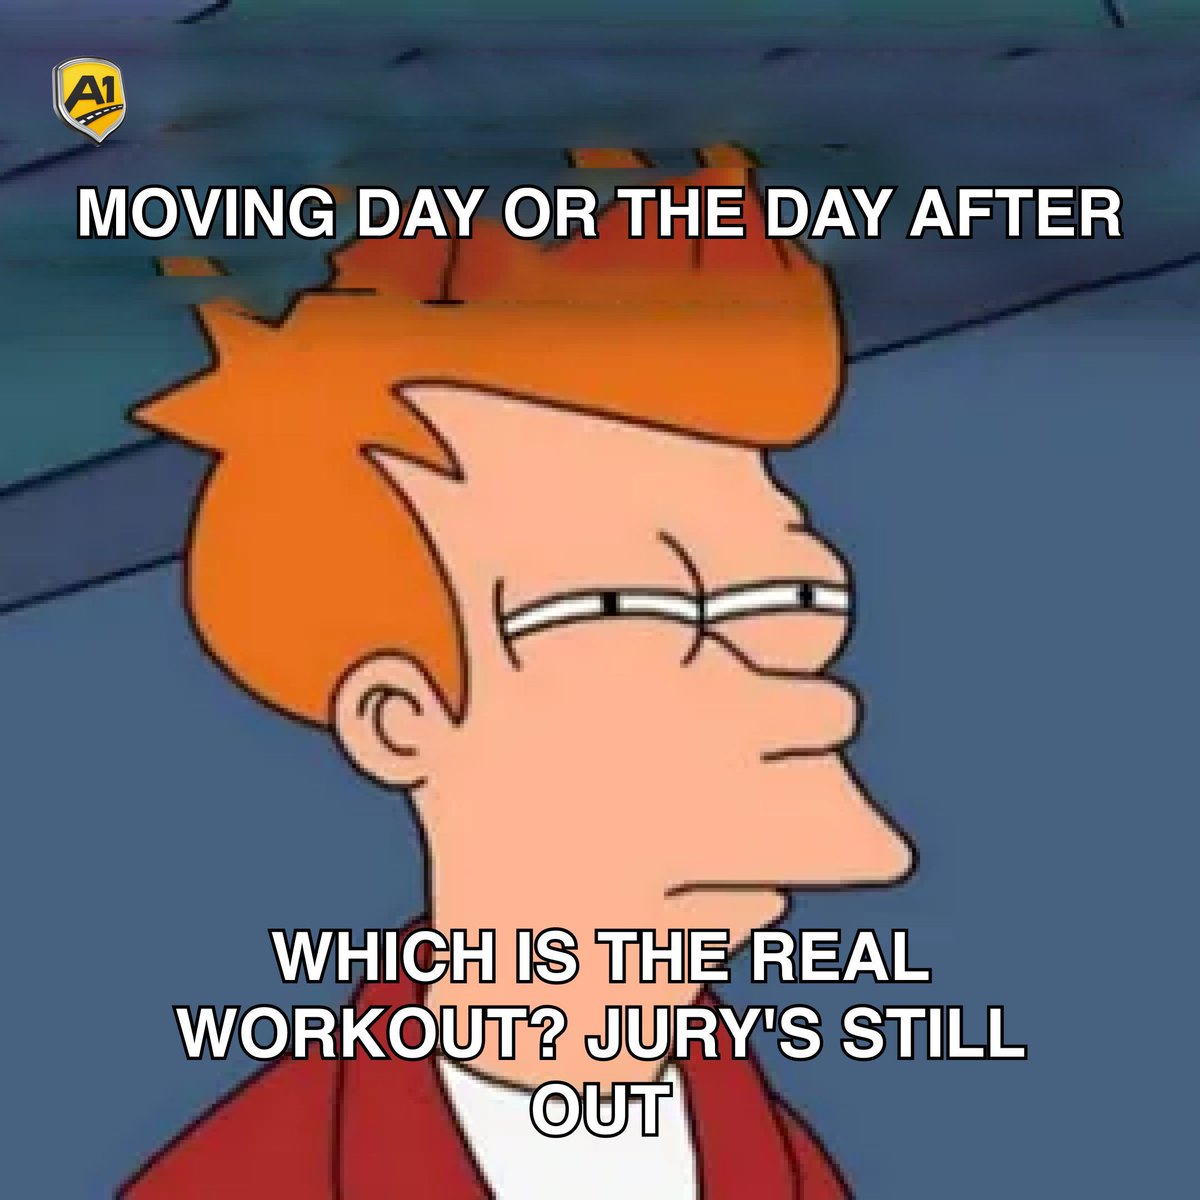 The day after moving: a test of will or a newfound fitness regime?🥲

At A1 Auto Transport, we handle the heavy lifting so you can focus on settling in... or recovering. 🤗 

👉 Get a free shipping estimate: a1autotransport.com

#A1autoservices #ontheroadagain #transport #car